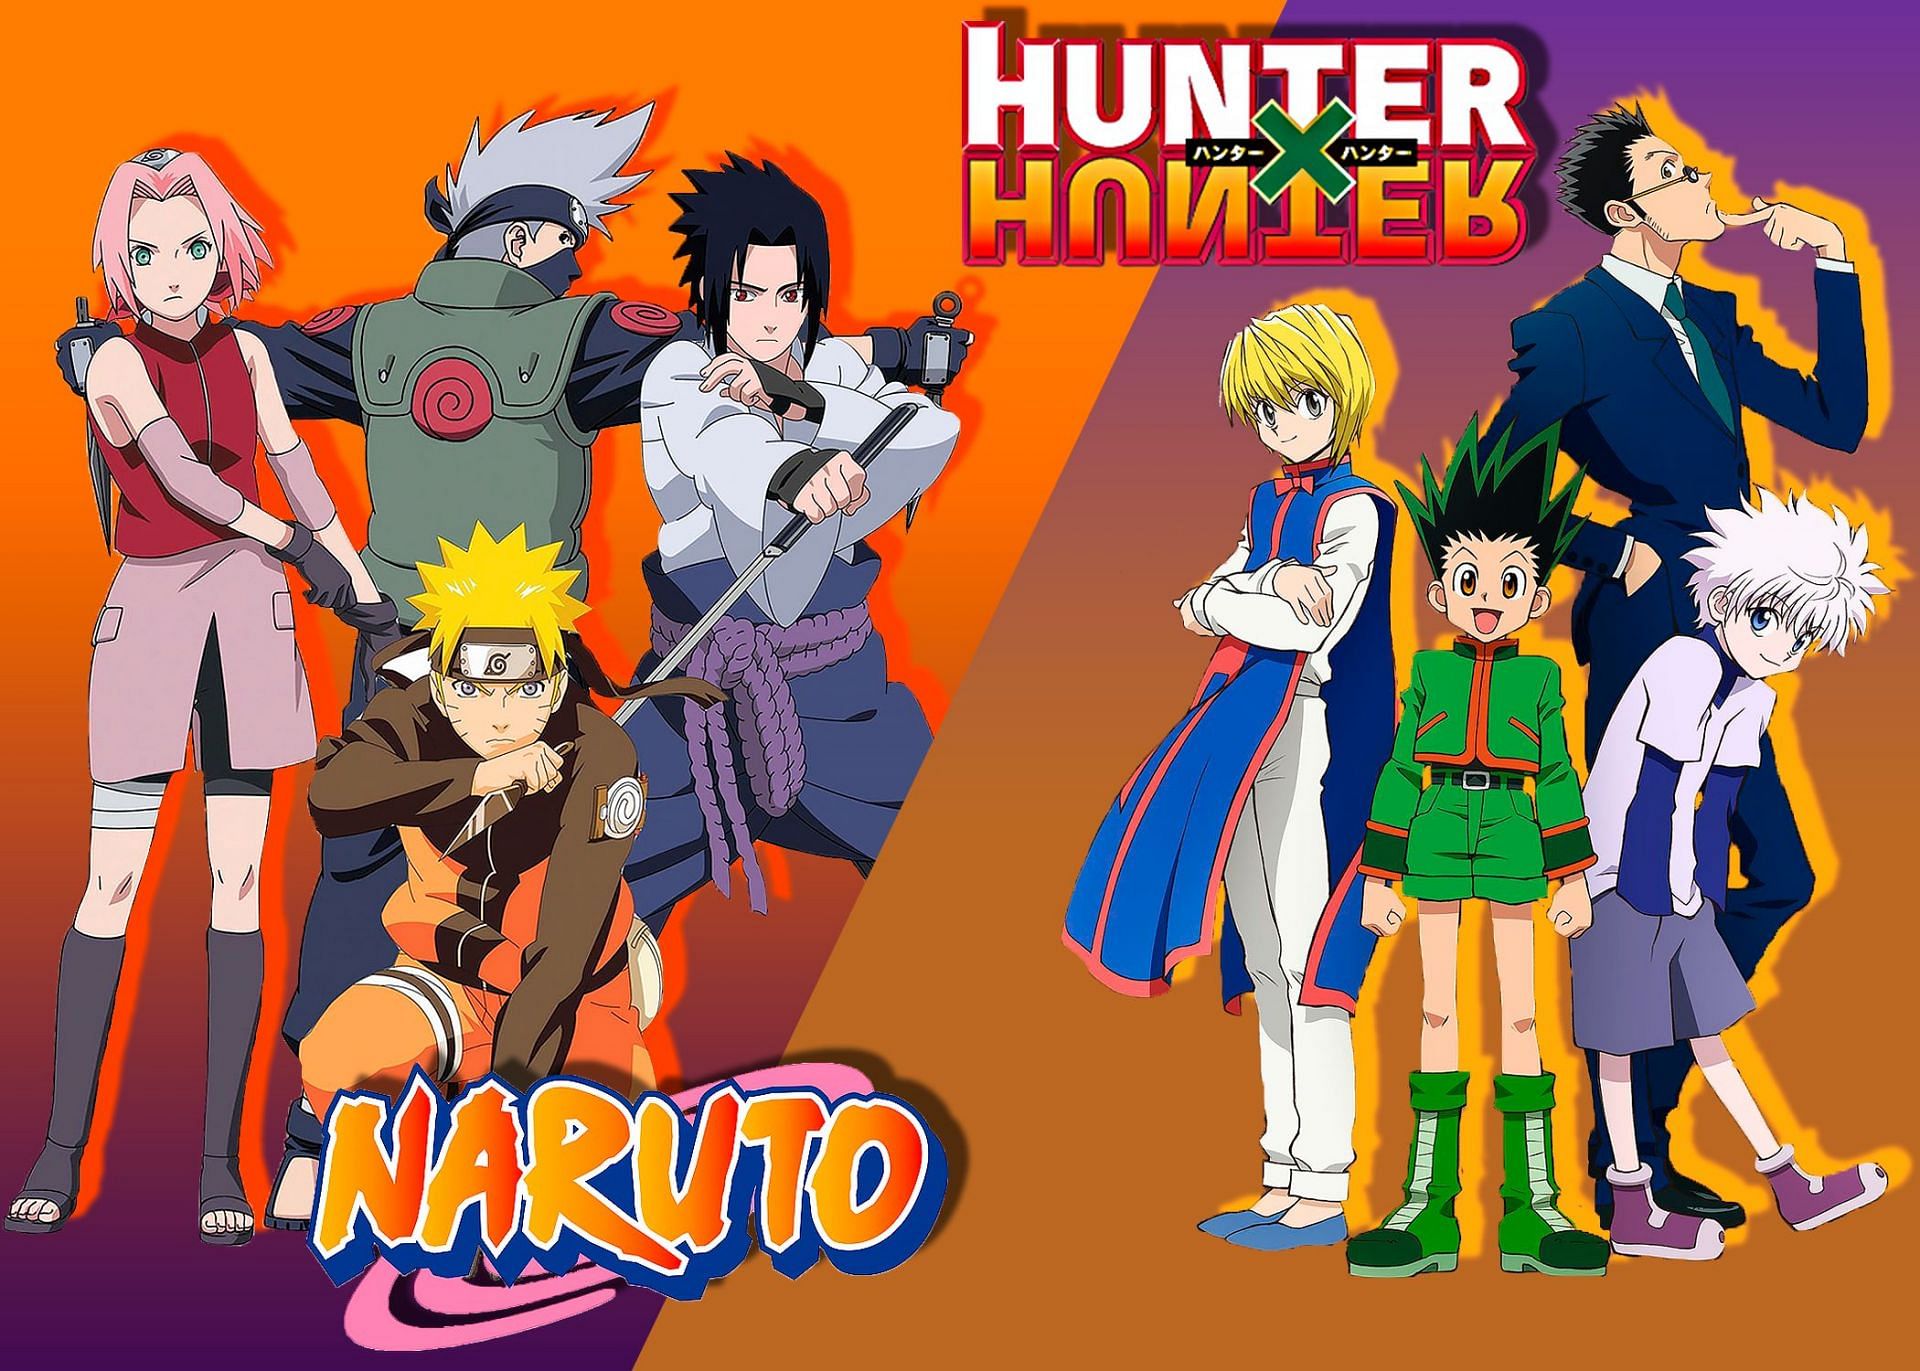 Was Naruto published before Hunter X Hunter? Or was it the other way around? (Image via Studio Pierrot and Madhouse).